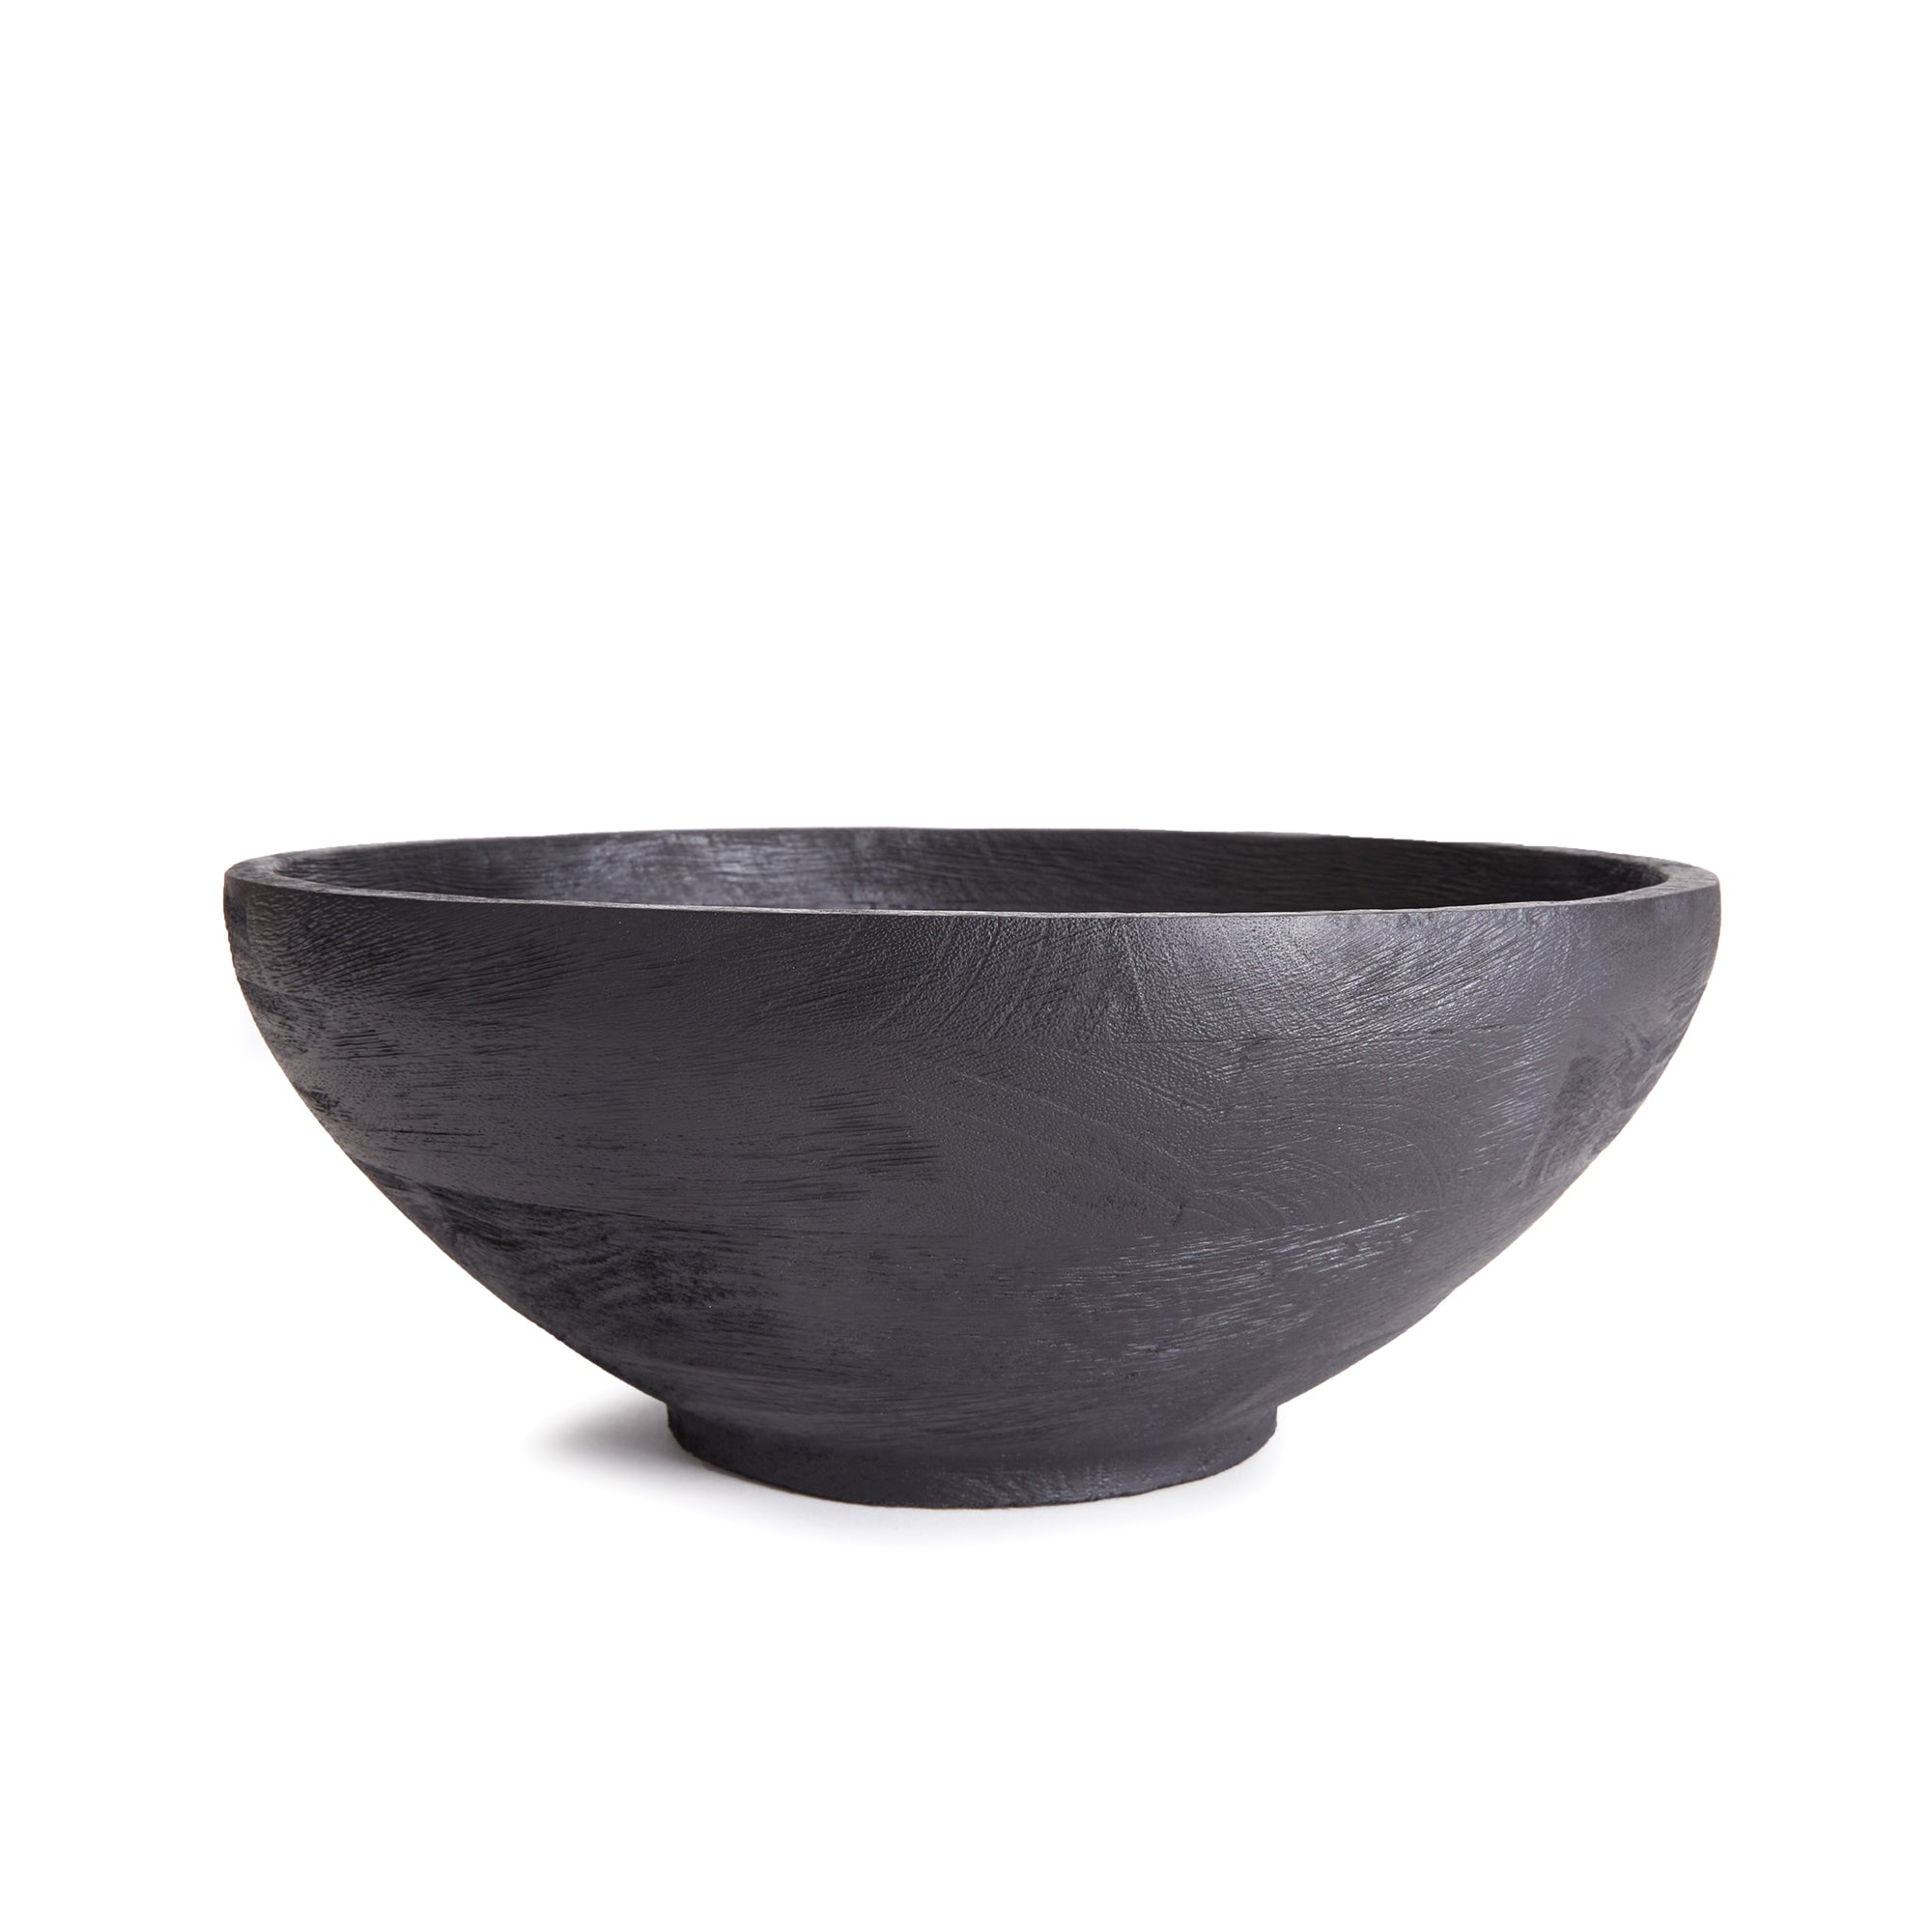 Serve up your best salad in this handcrafted serving bowl. Made of a solid mango wood and stained a dramatic deep black, it is a stunning vessel for your favorite recipes. Amethyst Home provides interior design, new construction, custom furniture, and area rugs in the Newport Beach metro area.